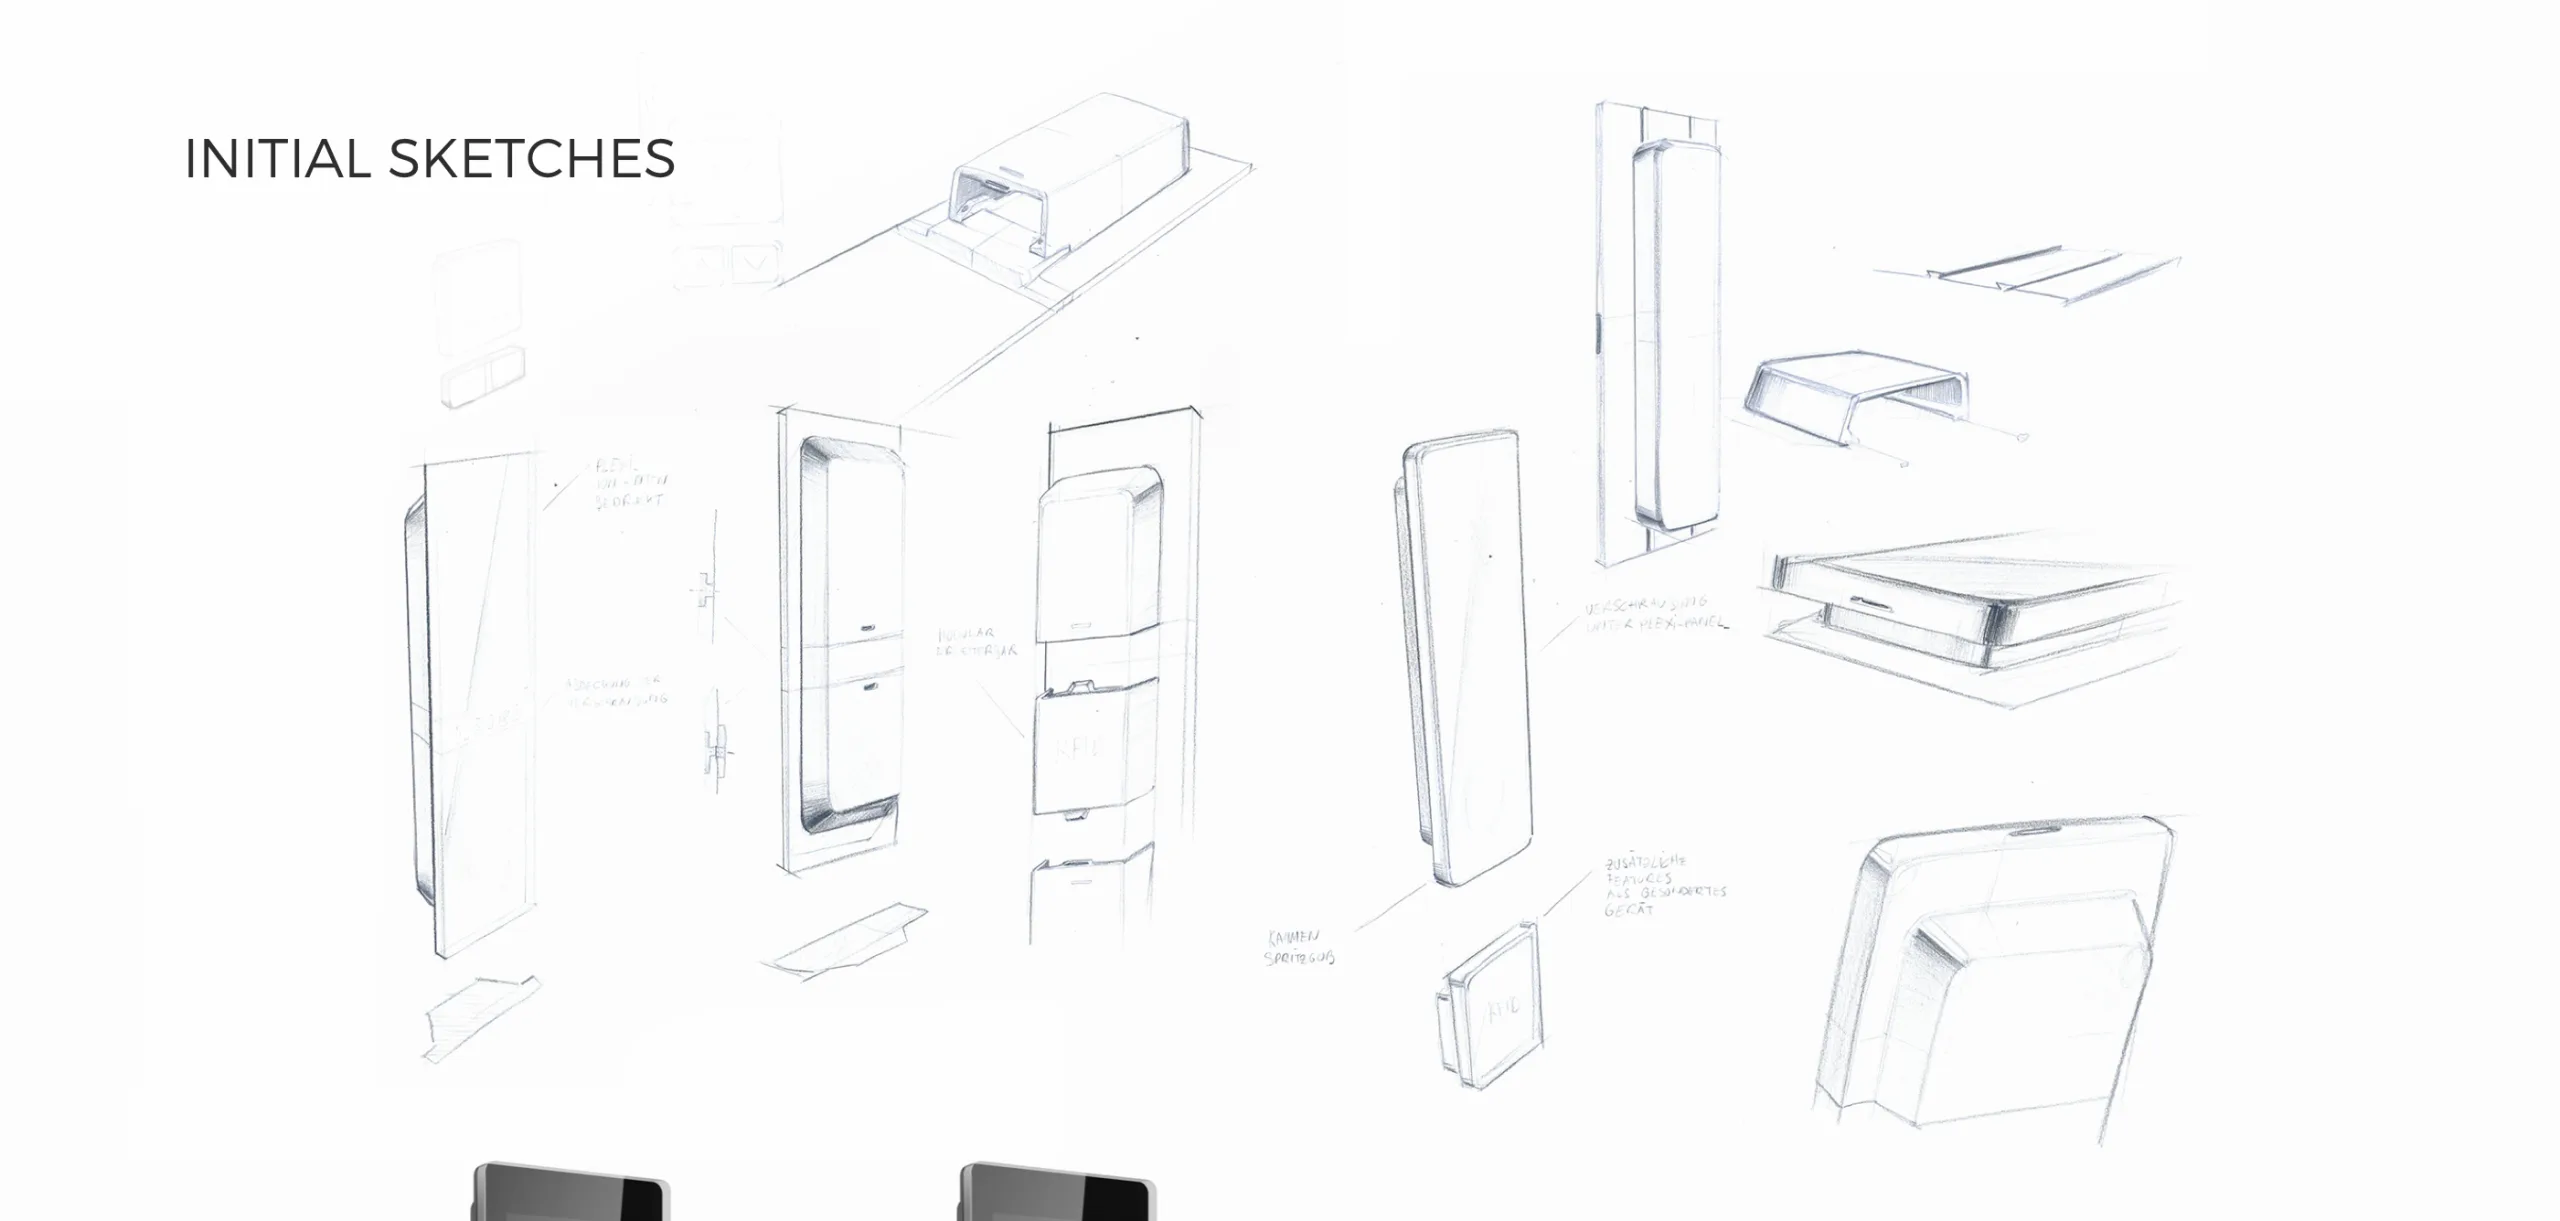 UI design sketches for Weigl VITMAX homelifts | Vienna